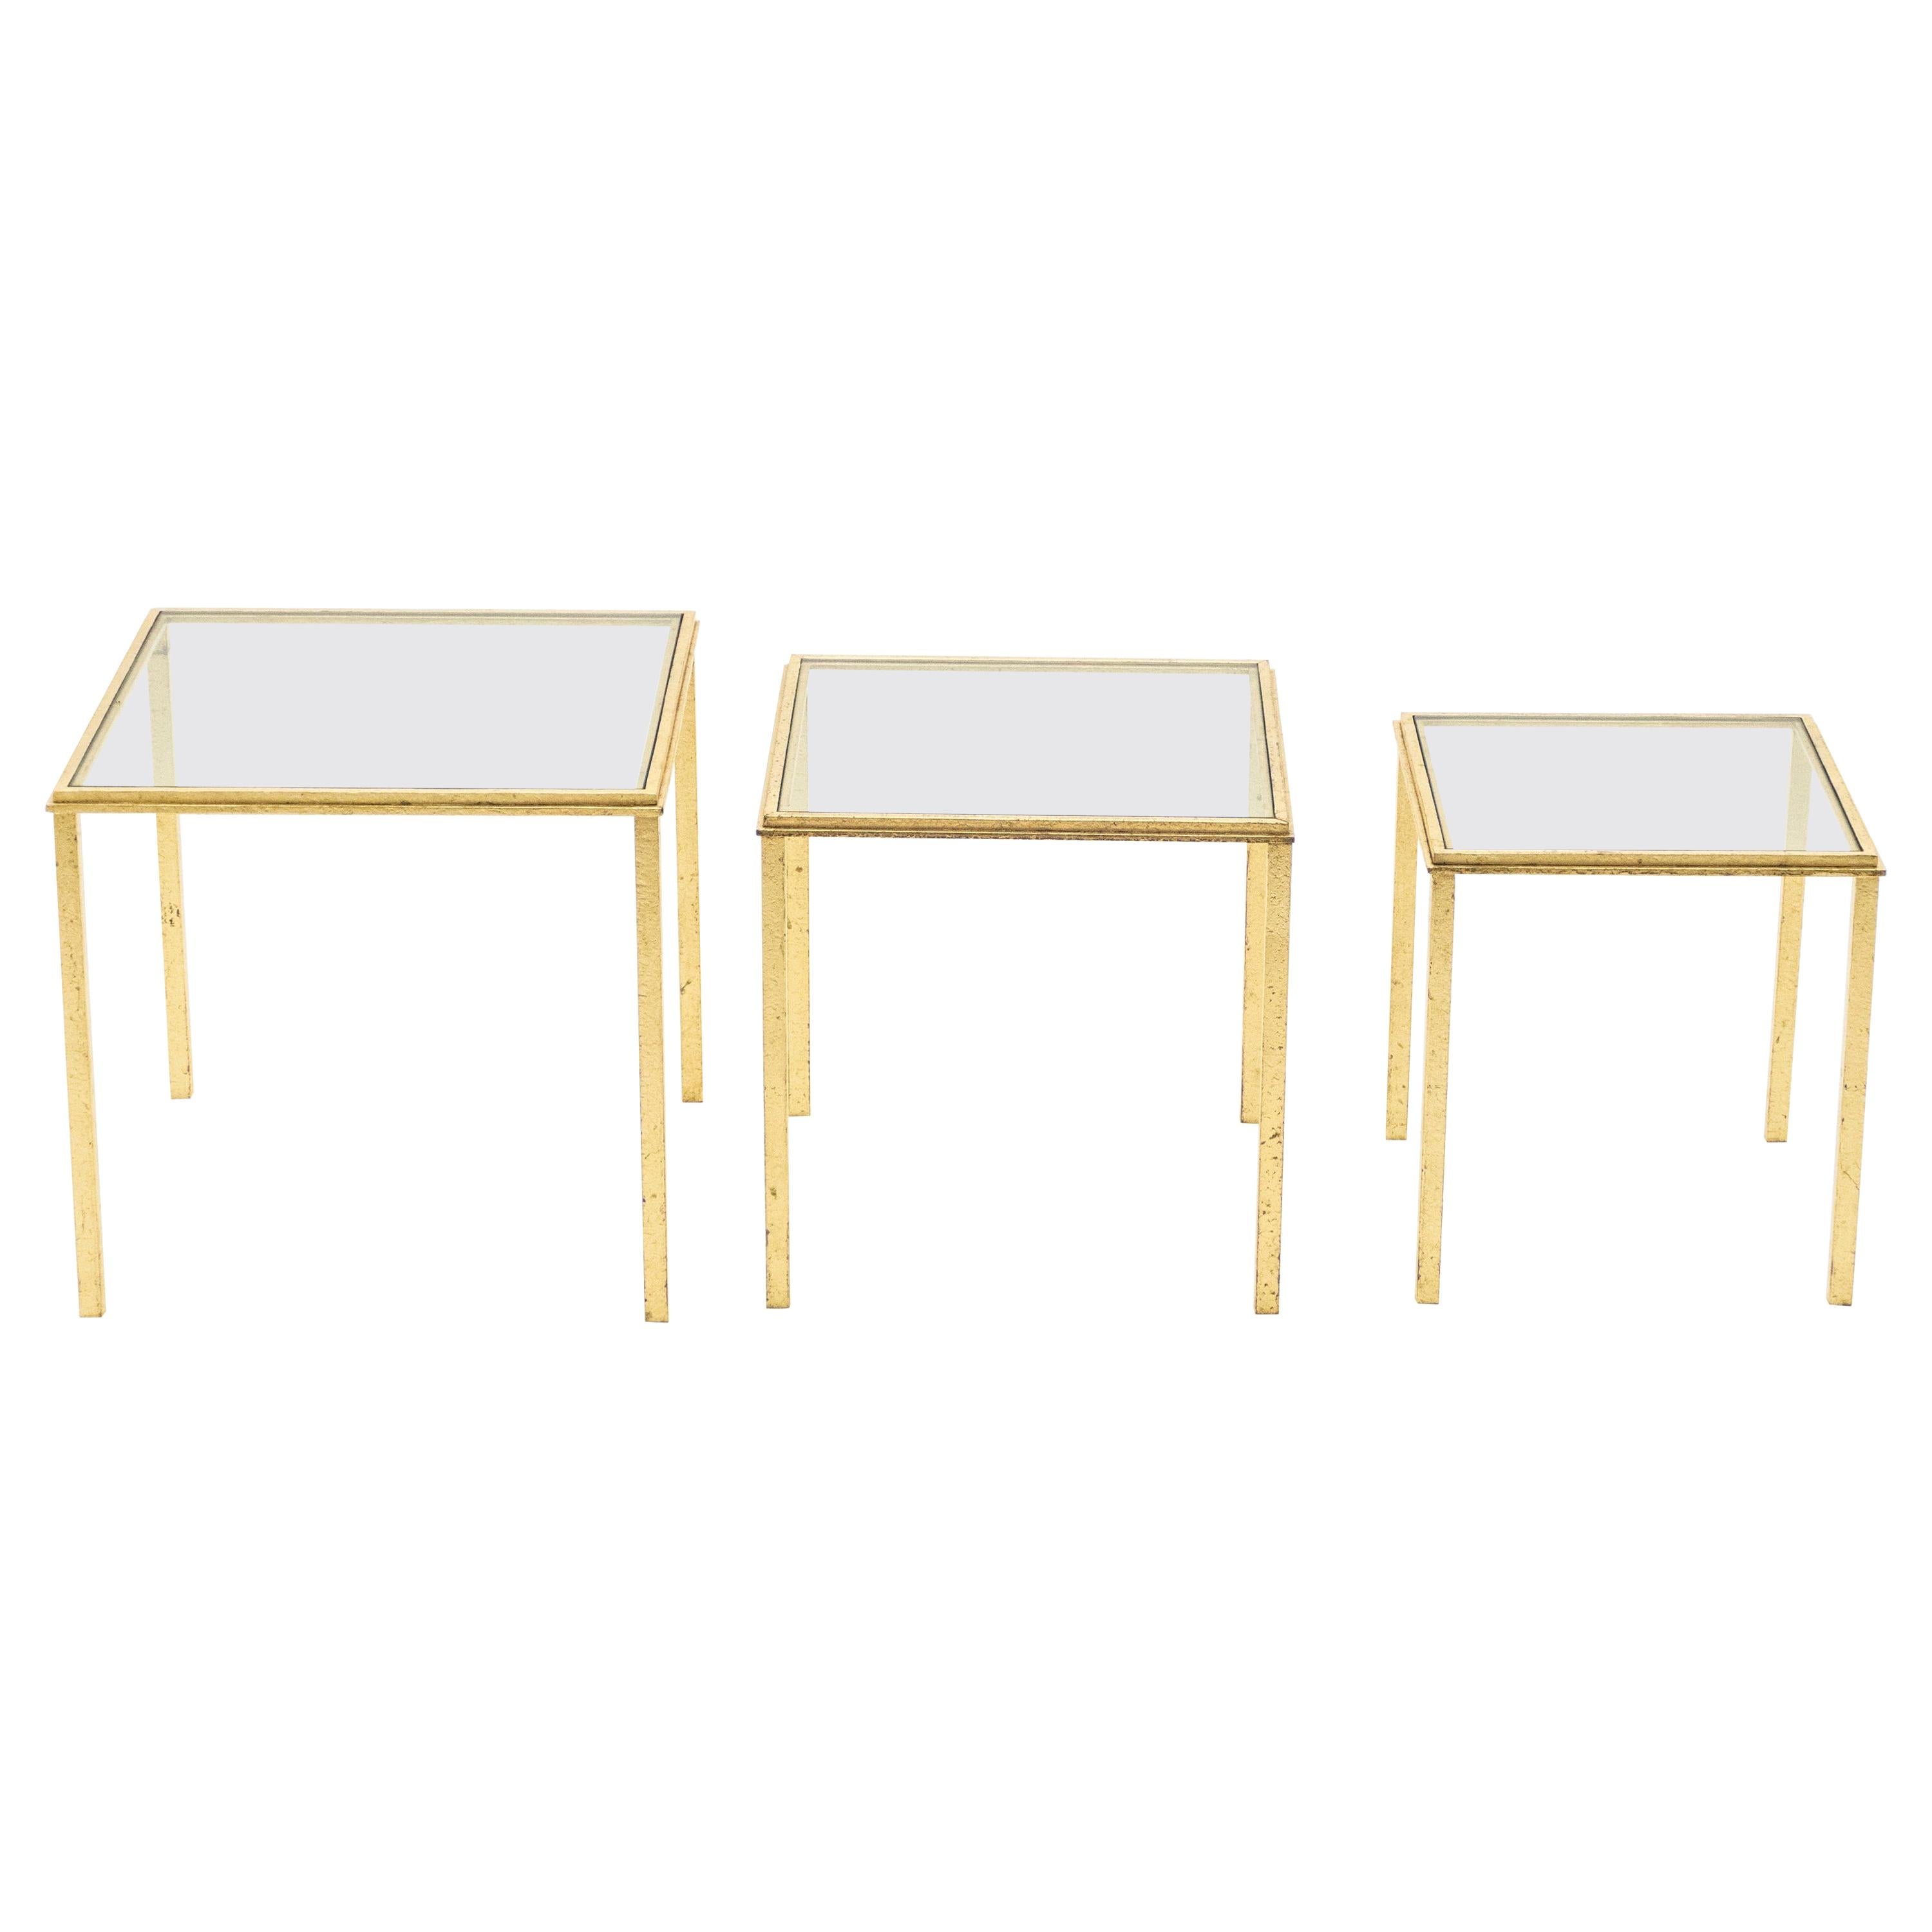 Mid-Century Modern Midcentury Roger Thibier Gilt Wrought Iron Gold Leaf Nesting Tables, 1960s For Sale